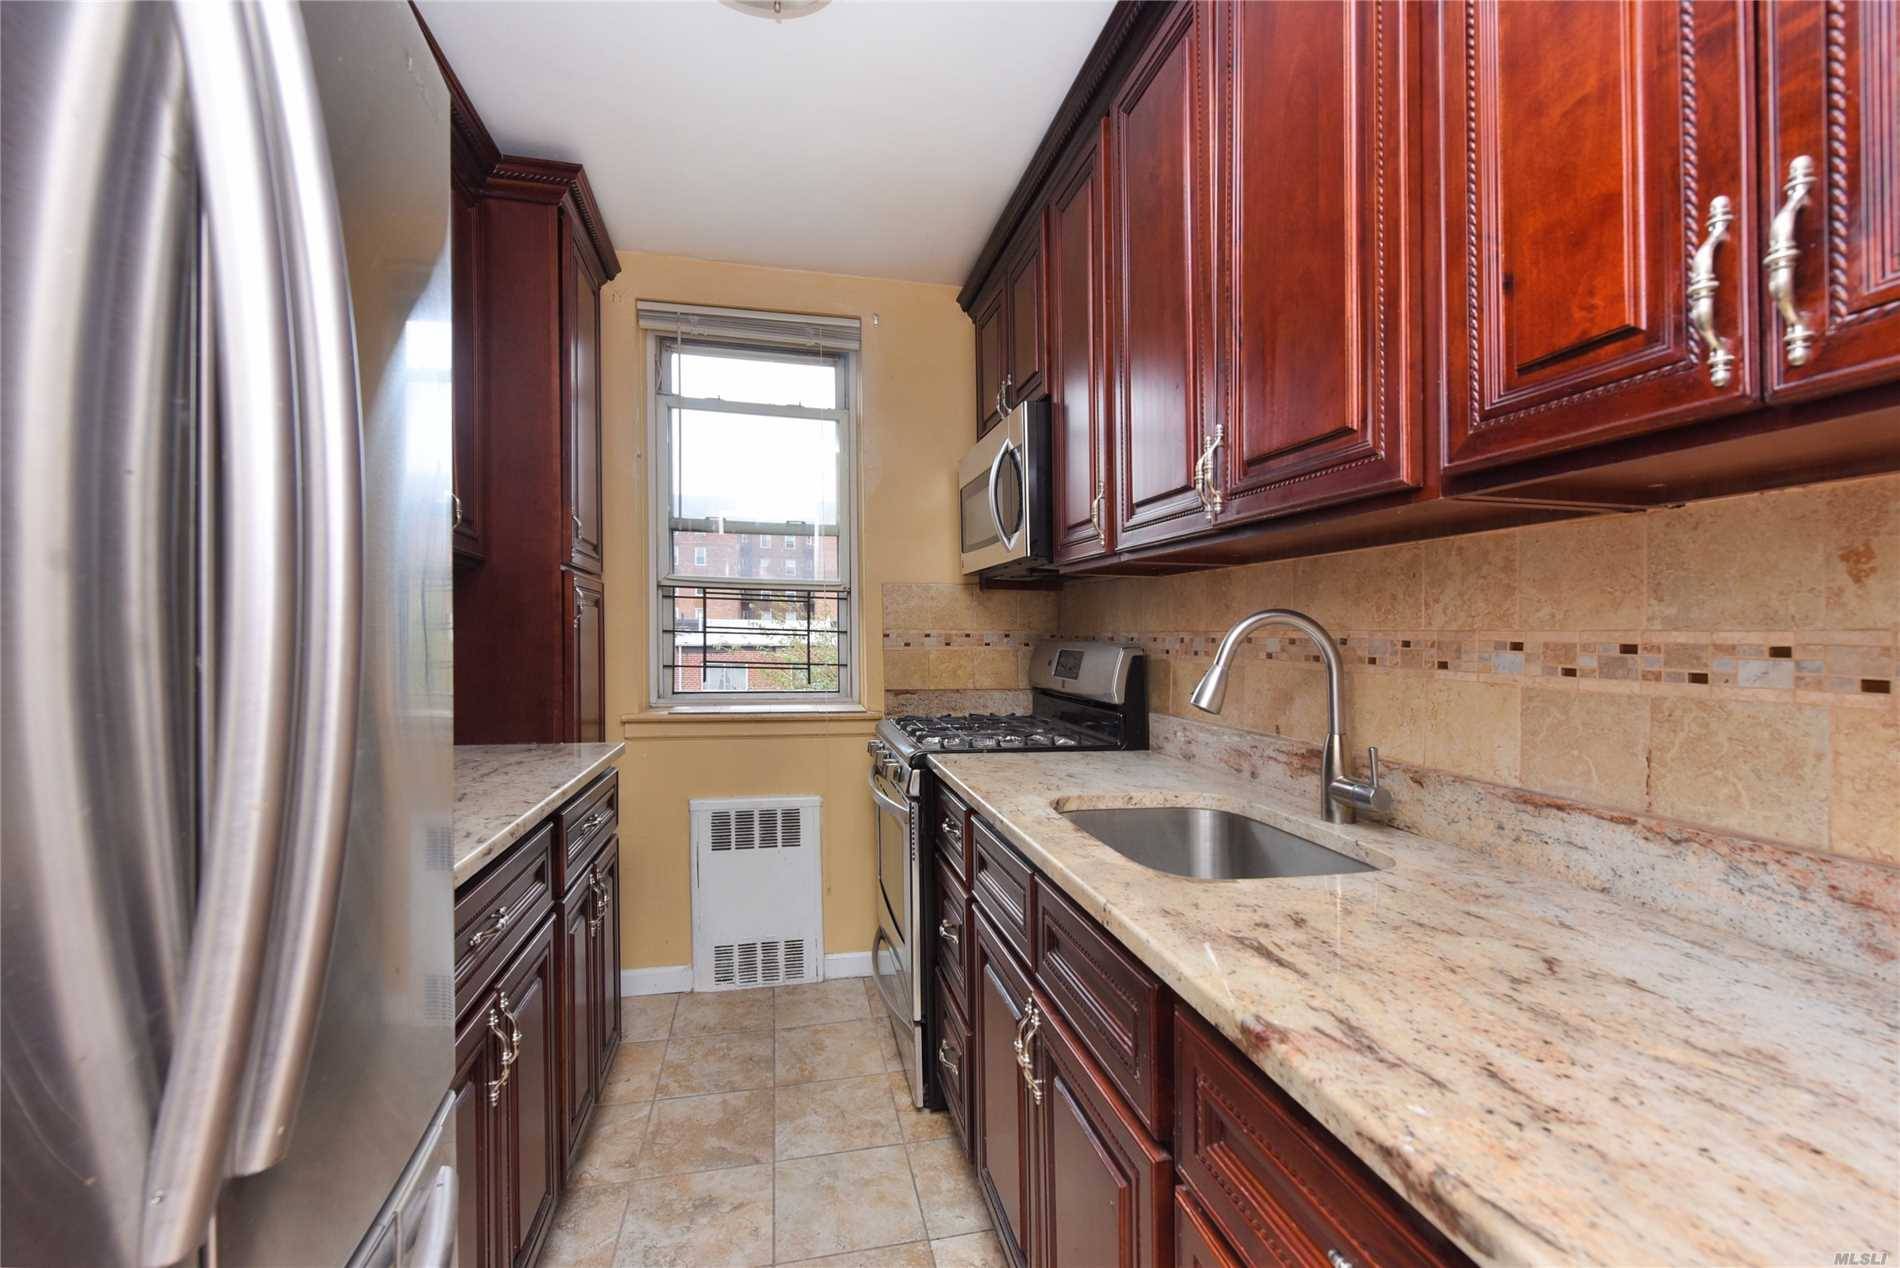 Sunny Spacious 2Br Co Op Apartment With Plenty Of Windows Include Kitchen And Bathroom.